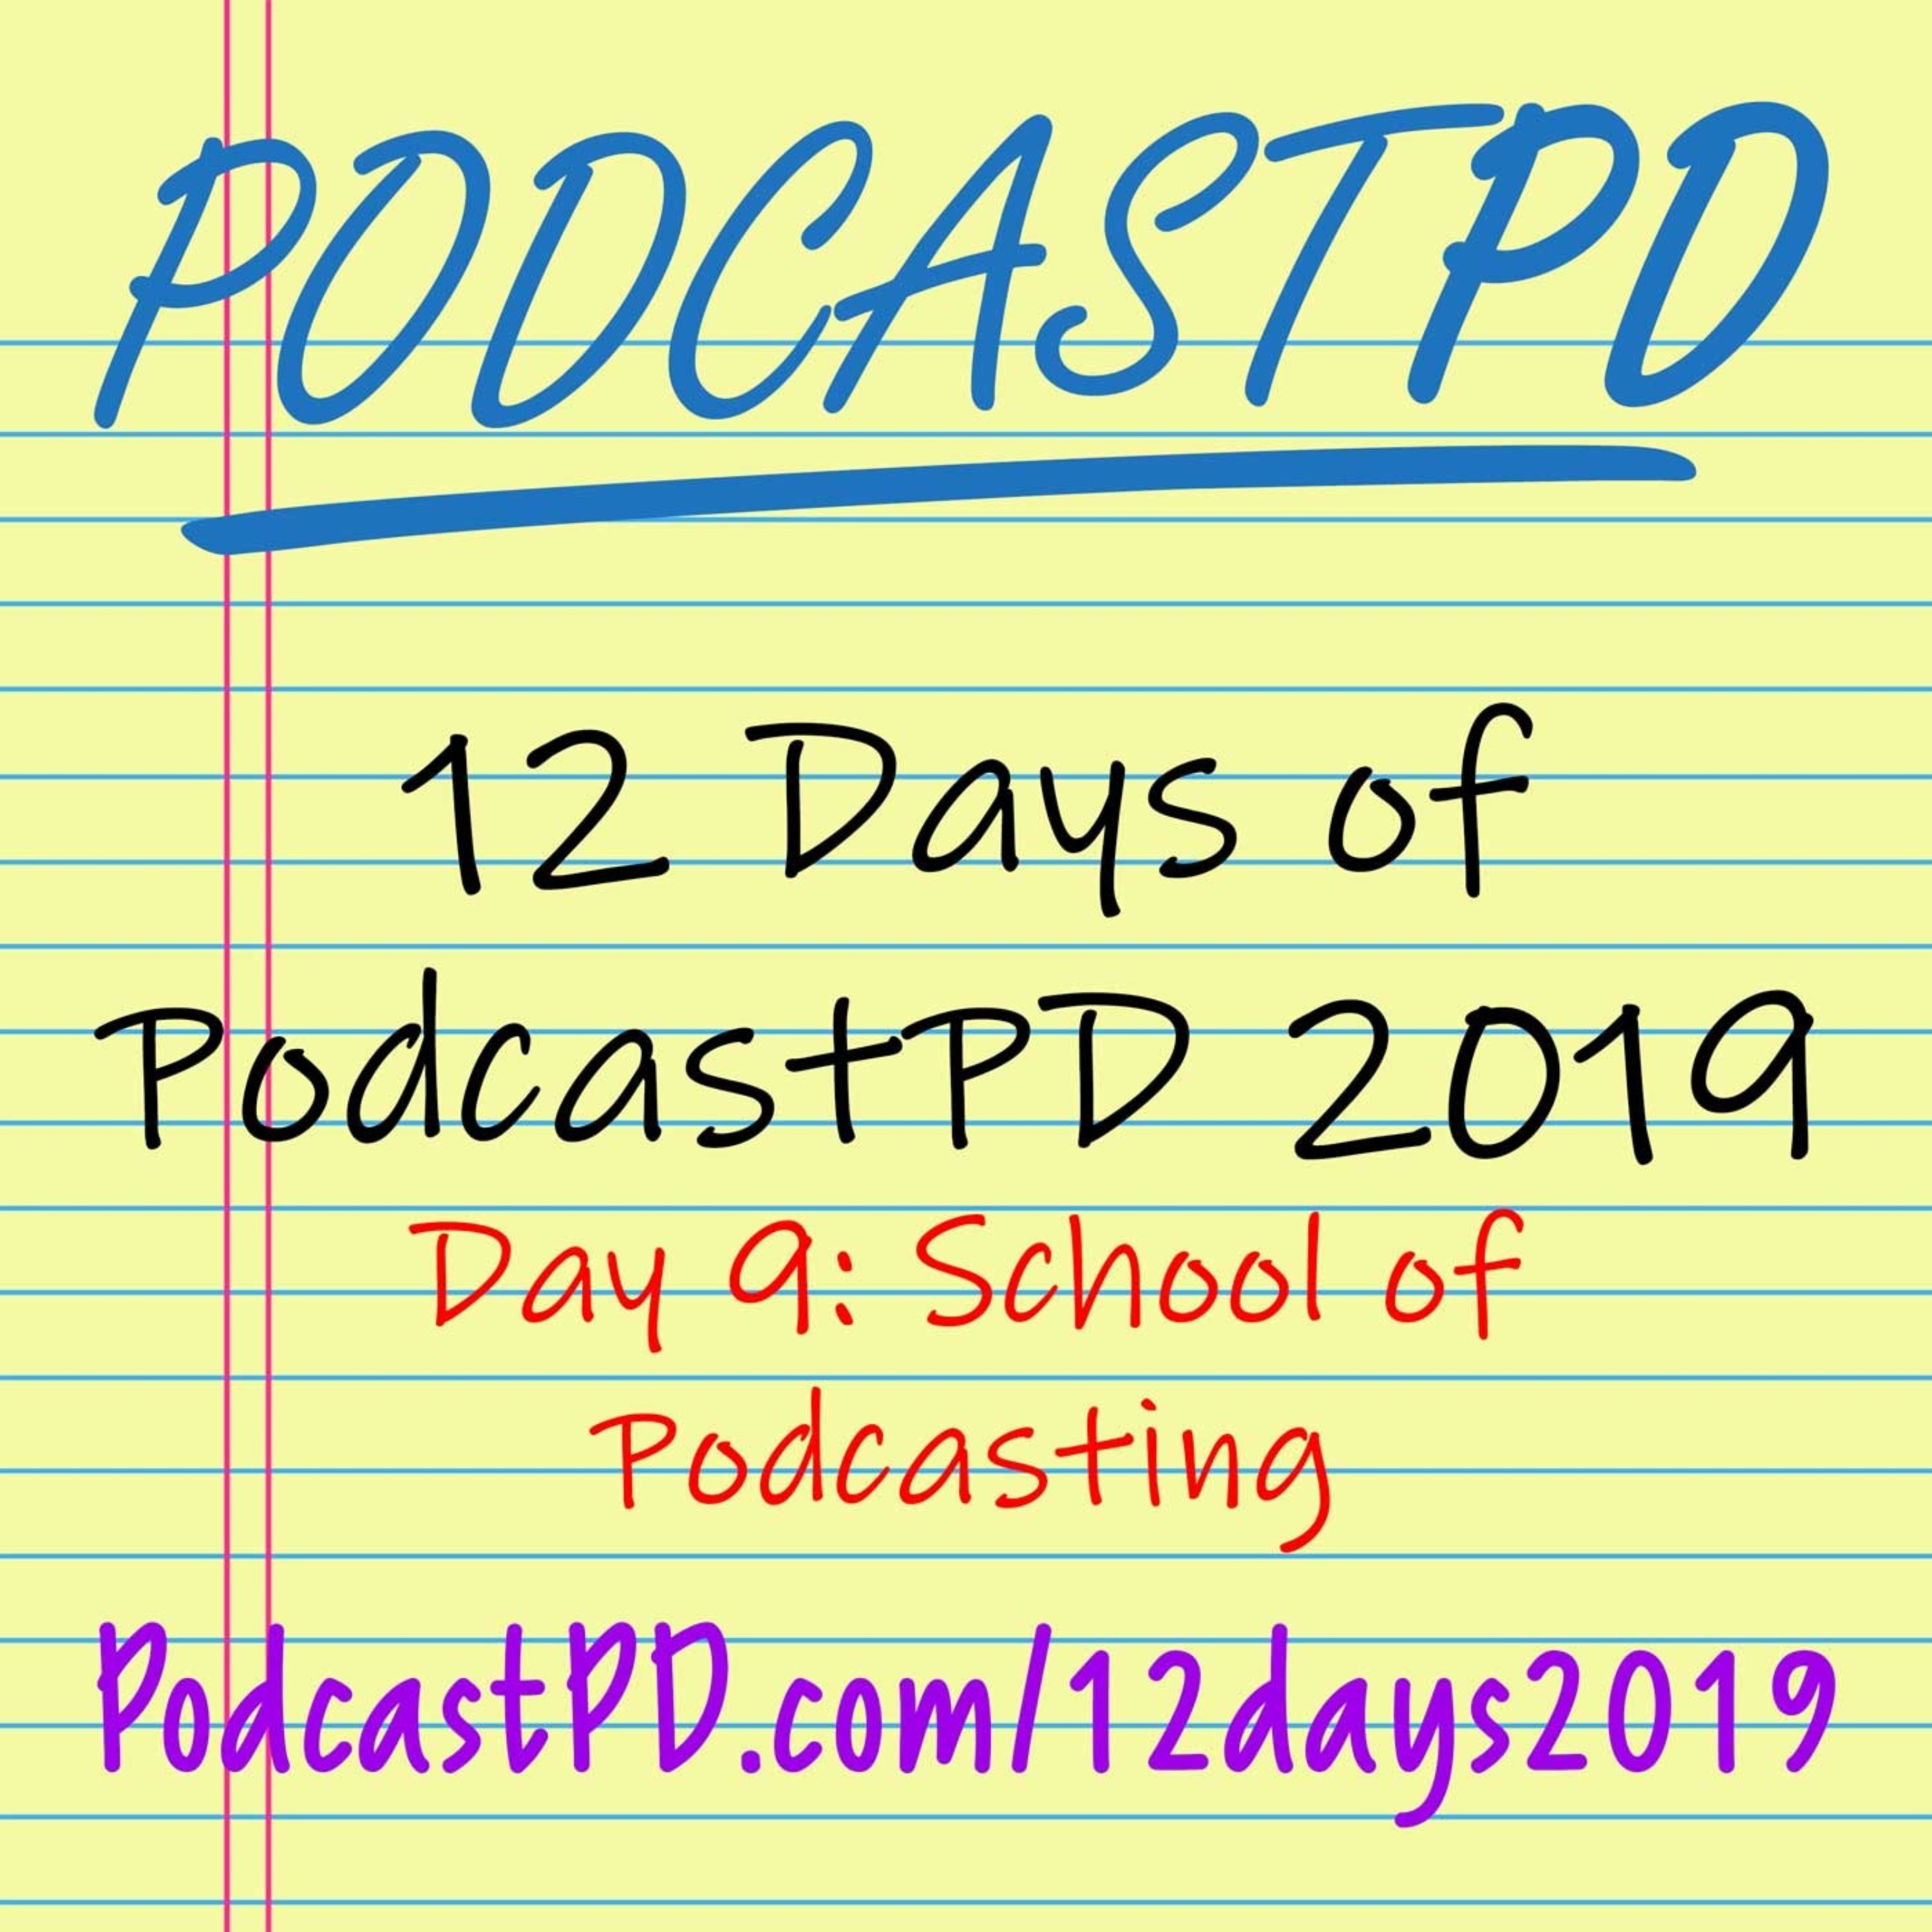 School of Podcasting - 12 Days of PodcastPD 2019 Image